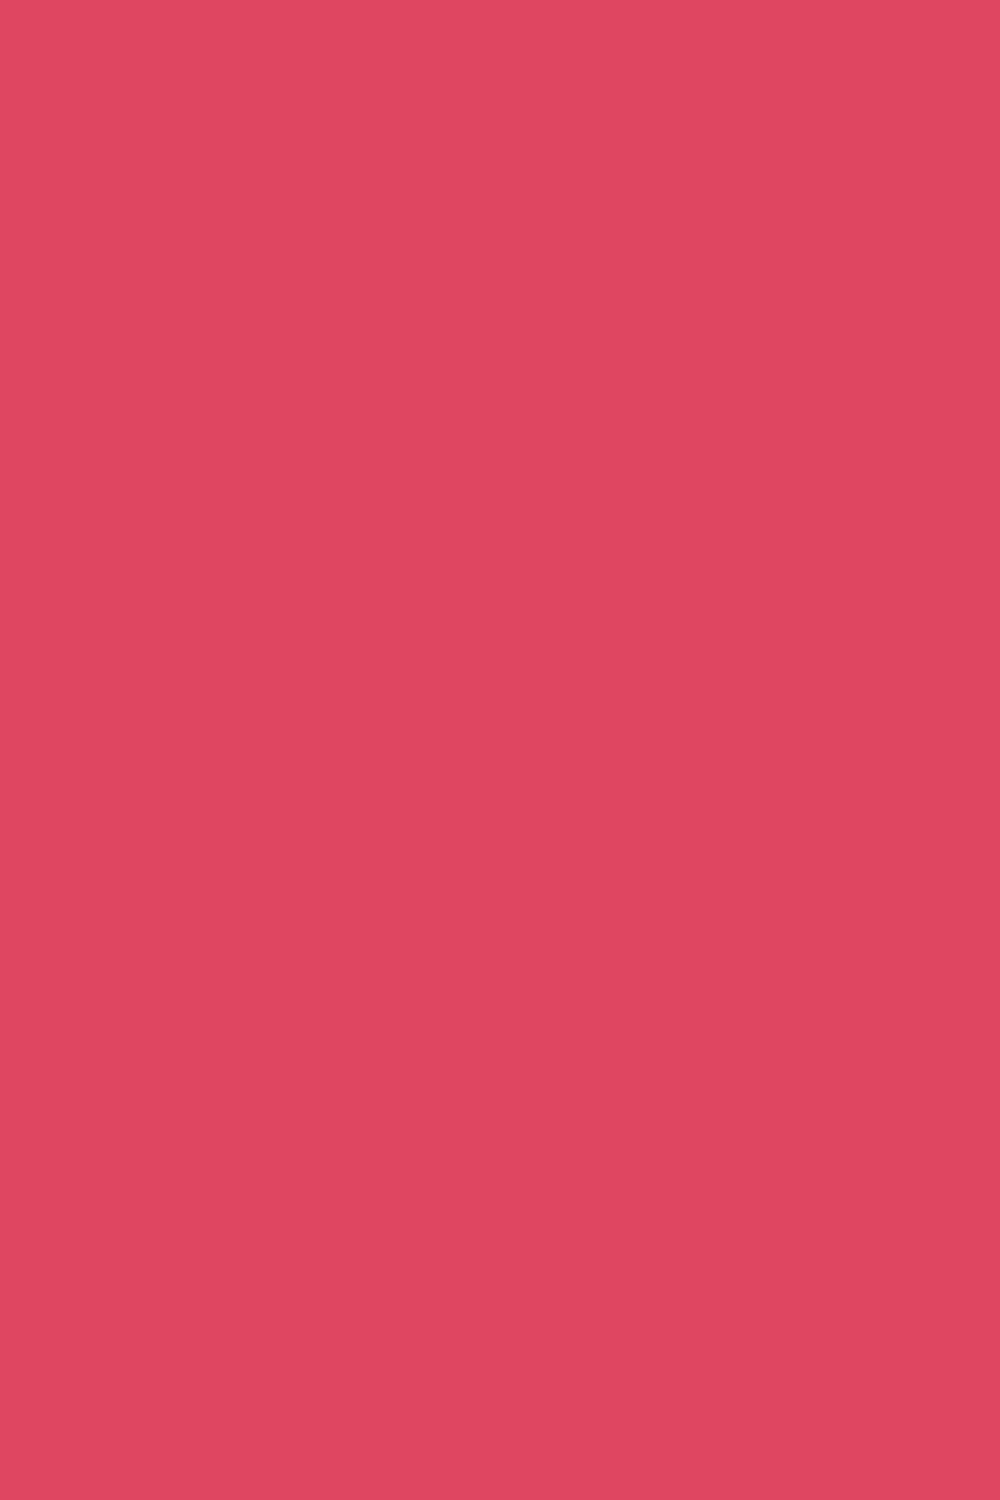 Brand Colors. Red wallpaper, Plain pink background, Pink wallpaper background